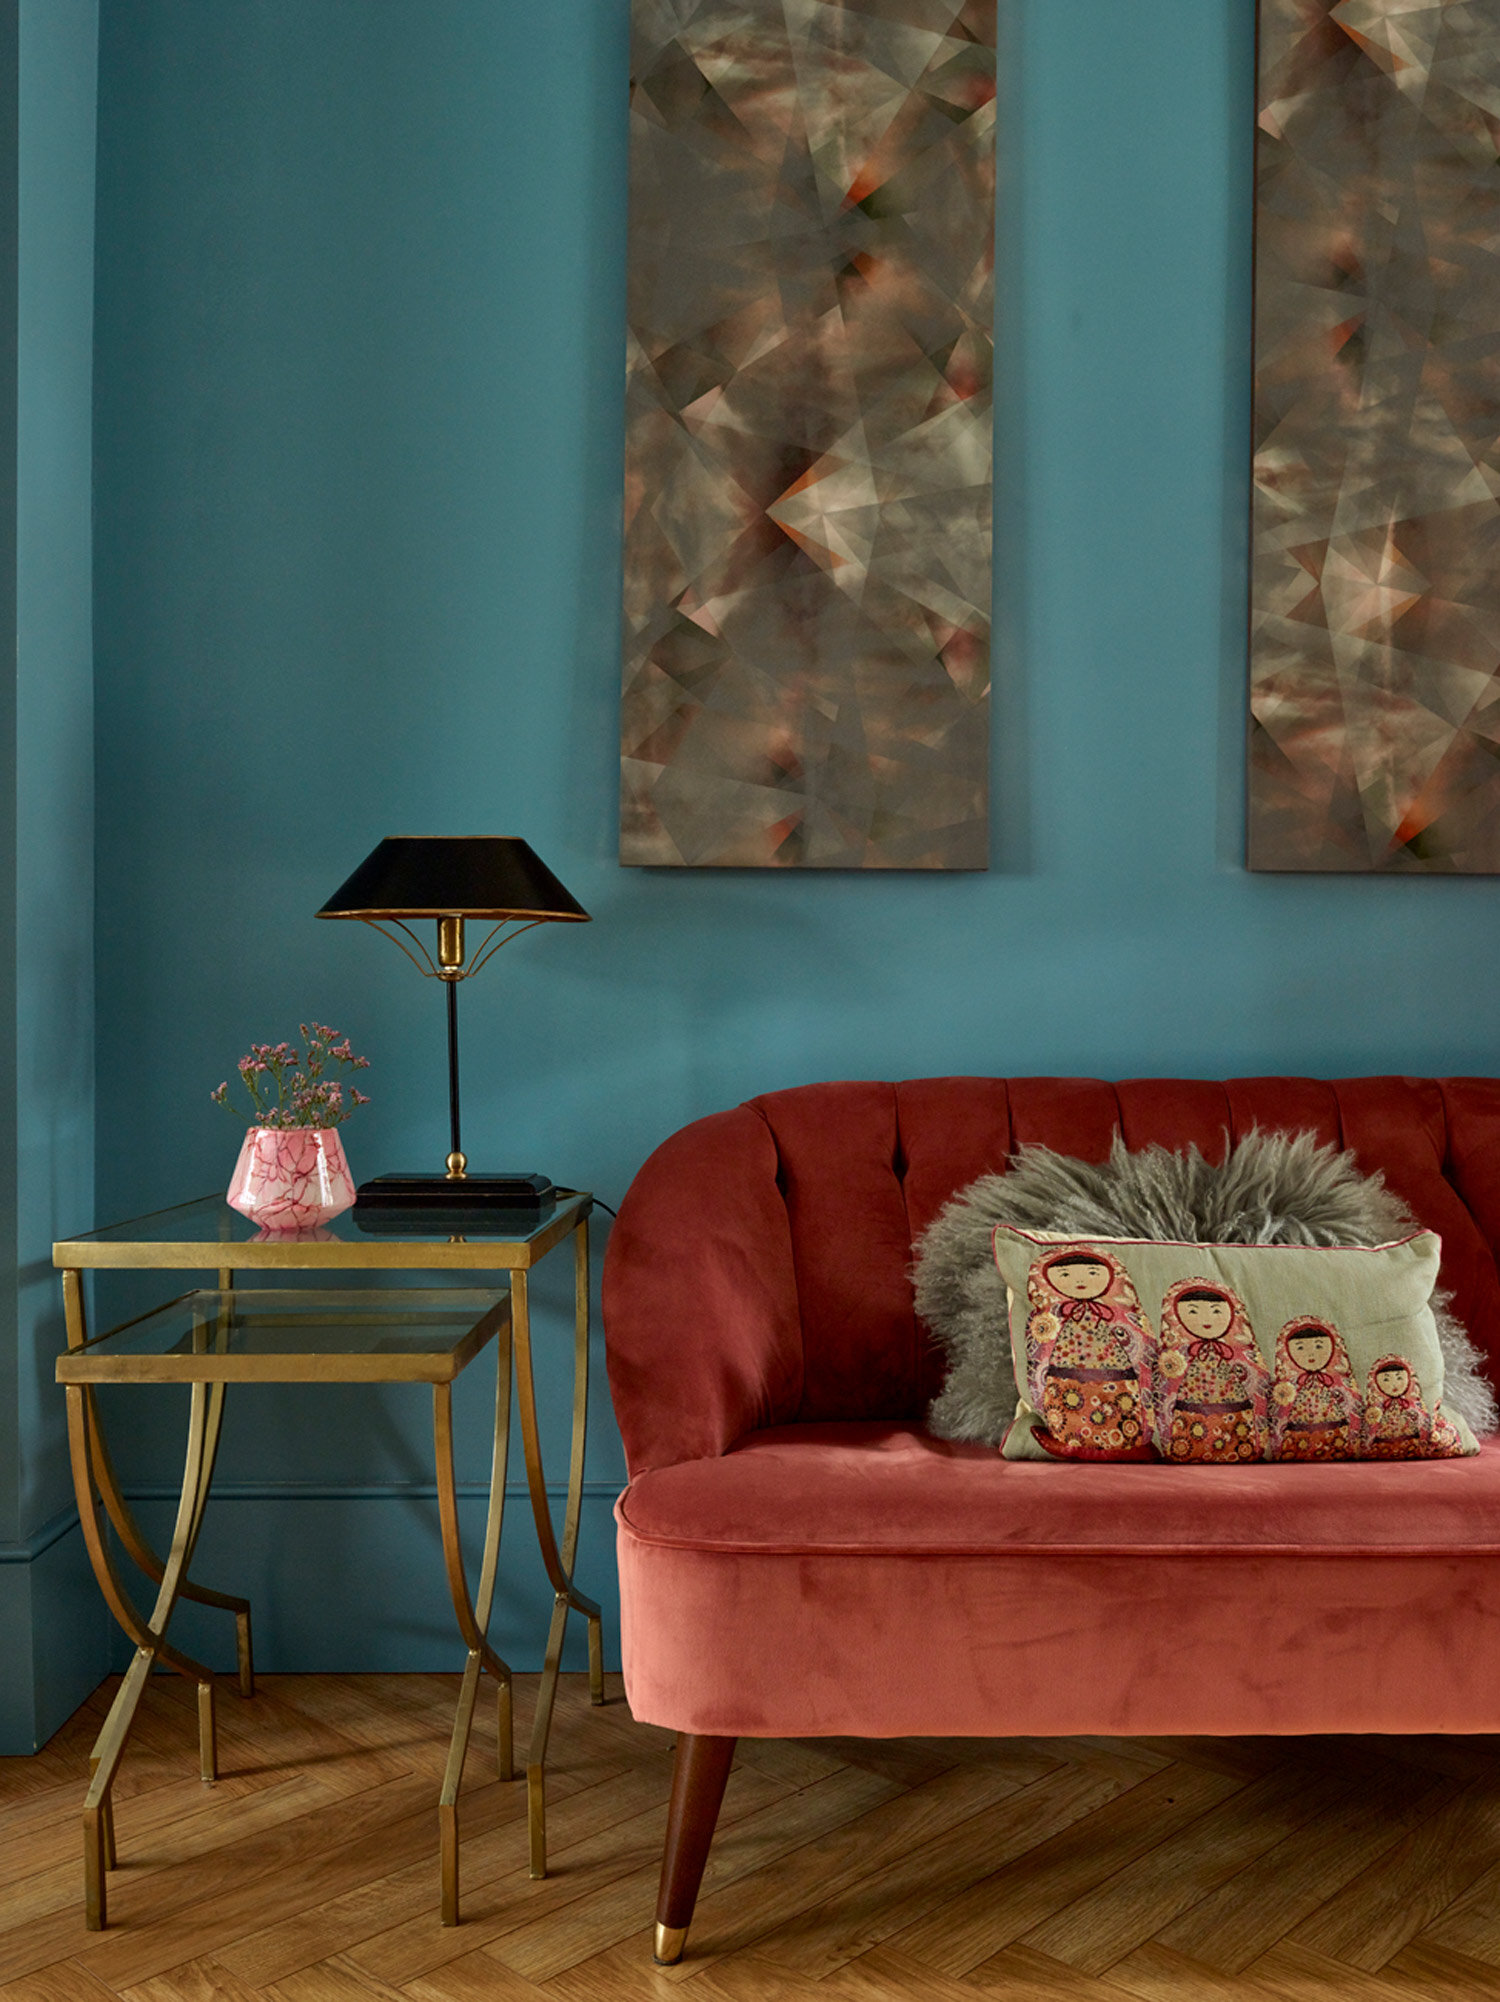 finchley-11-teal-lounge-coral-sofa.jpg